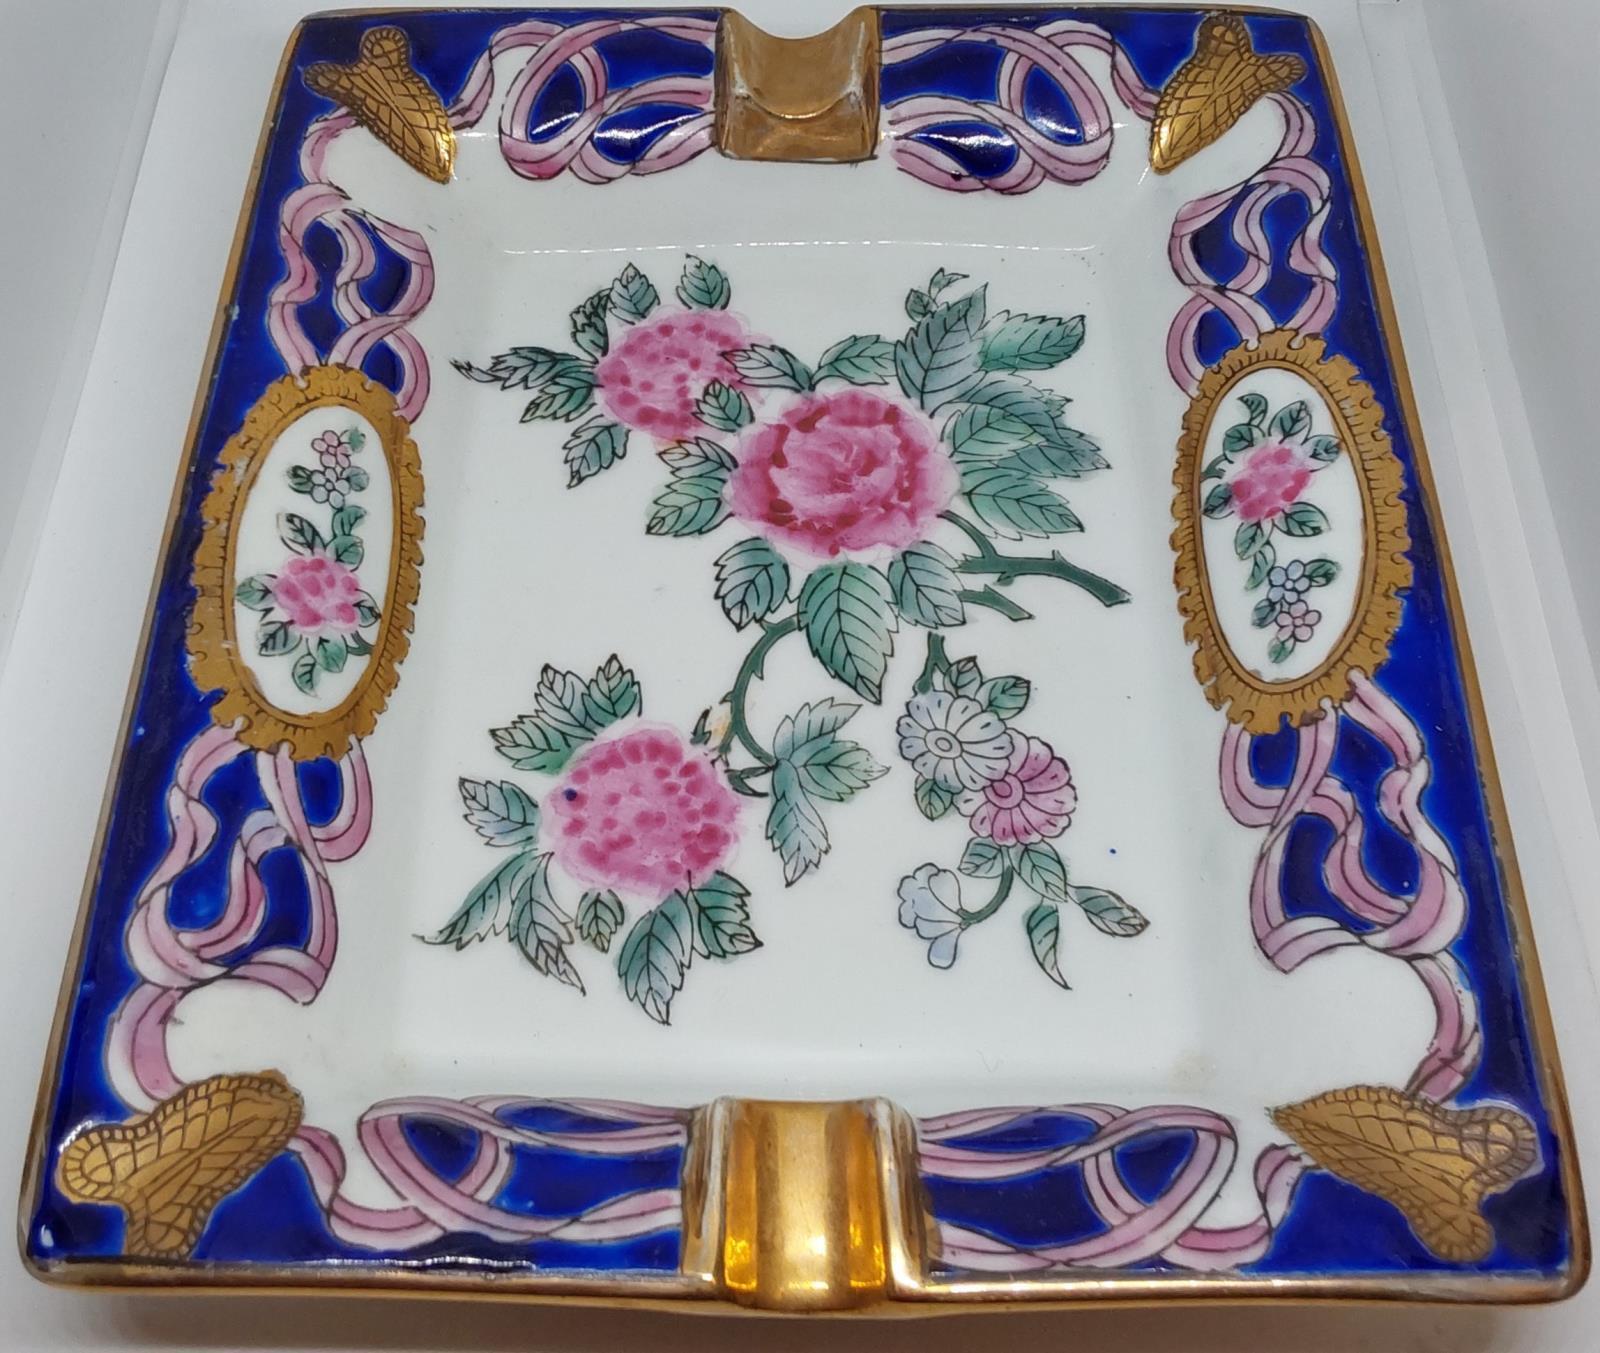 Murata Art Vancouver Canada Hand Painted Pink Peonies Porcelain Ashtray - New